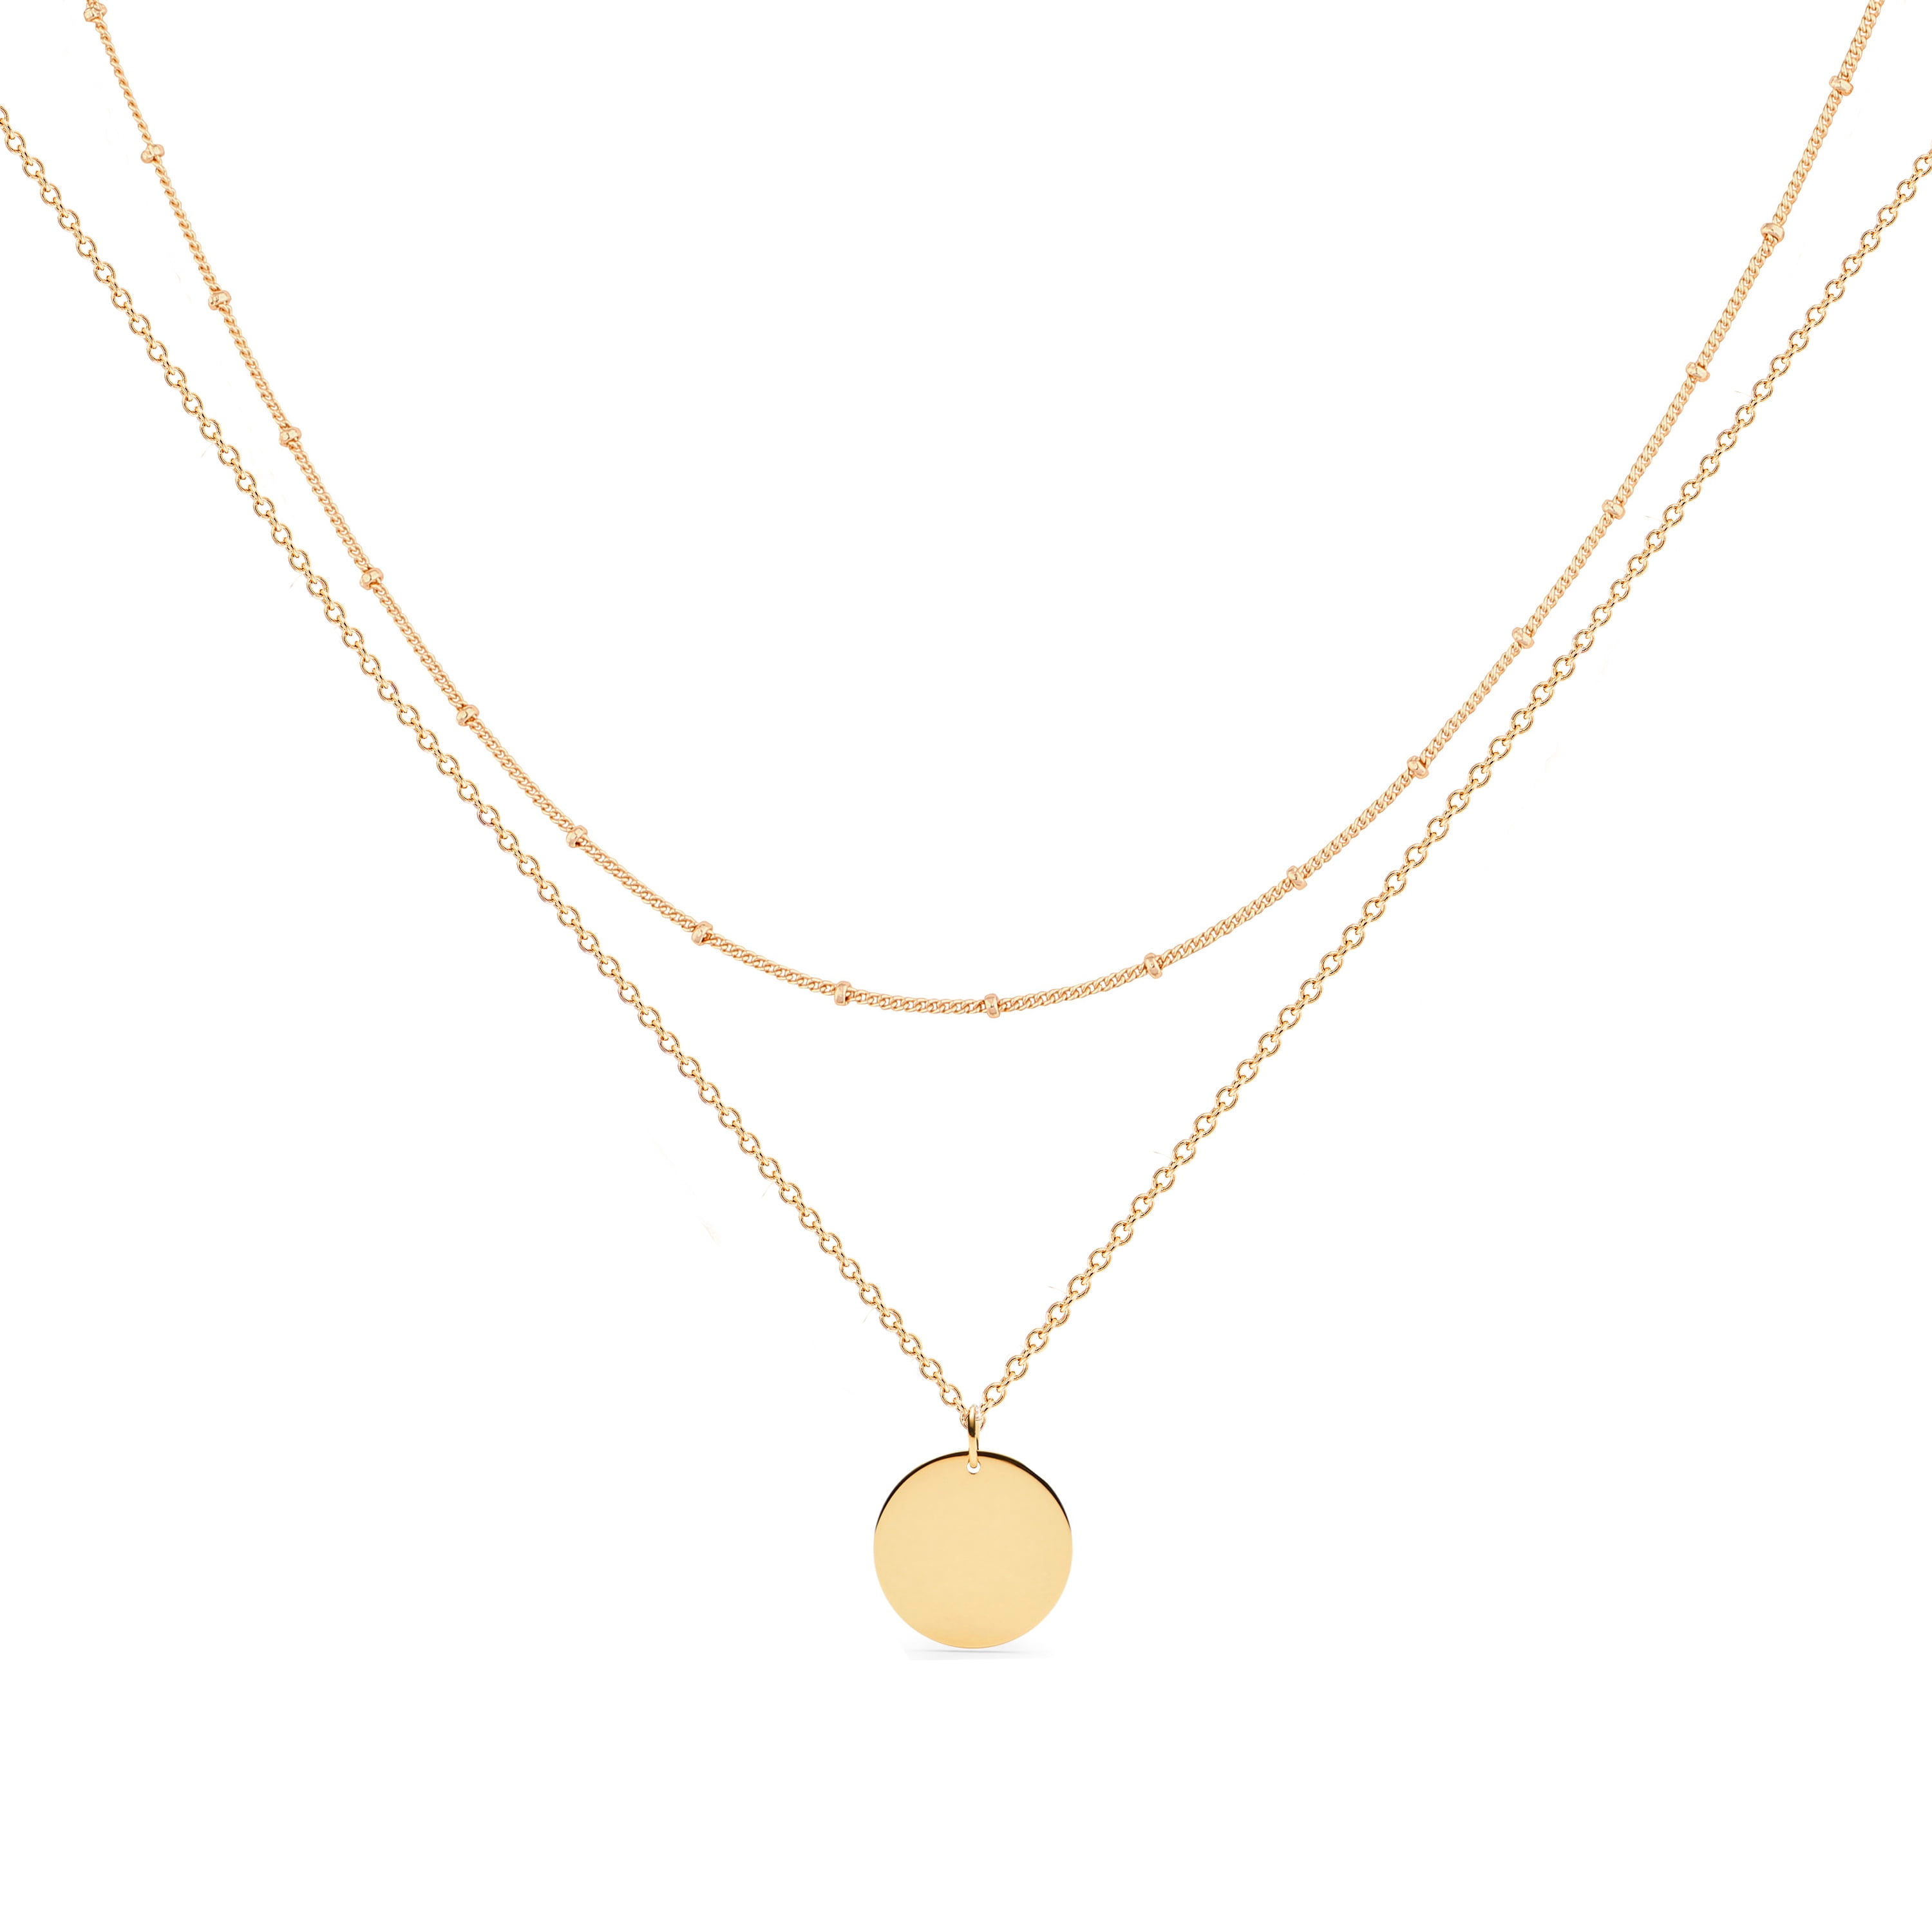 Mevecco 18K Gold Layered Disc/Circle Bead Chain Dainty Elegant Simple ...